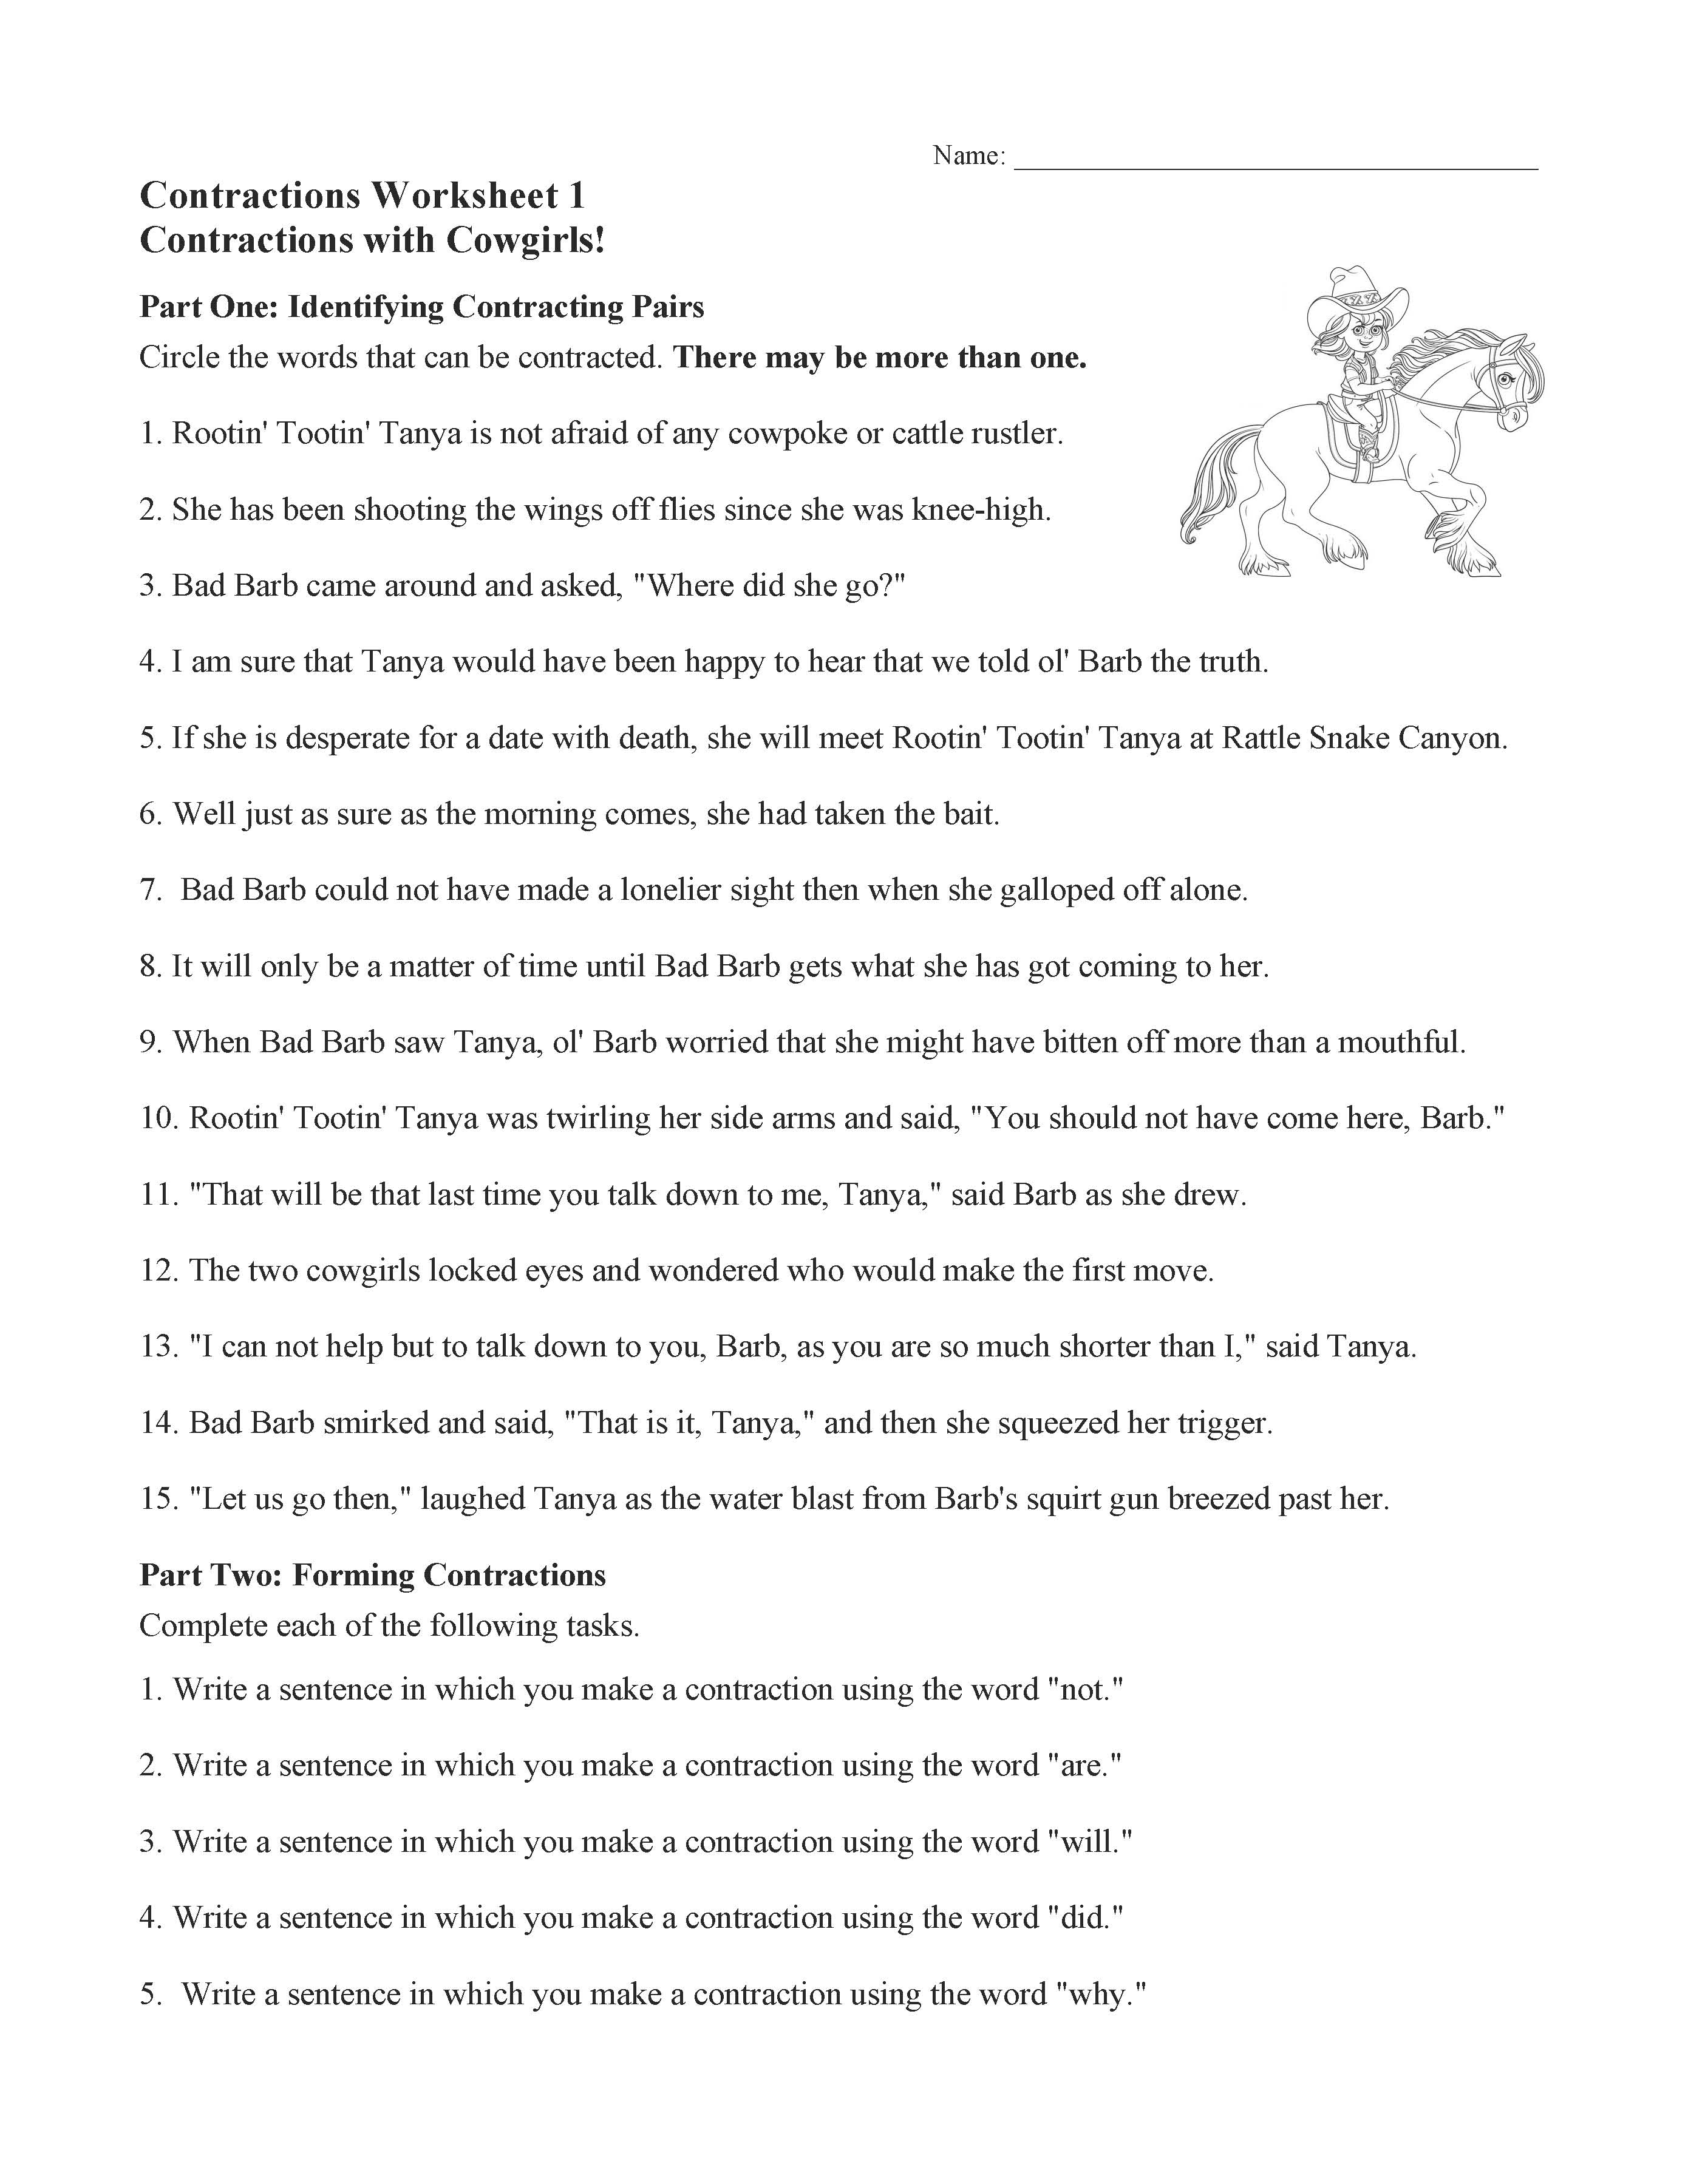 Contractions Worksheets and Activities  Ereading Worksheets Within Contractions Worksheet 2nd Grade